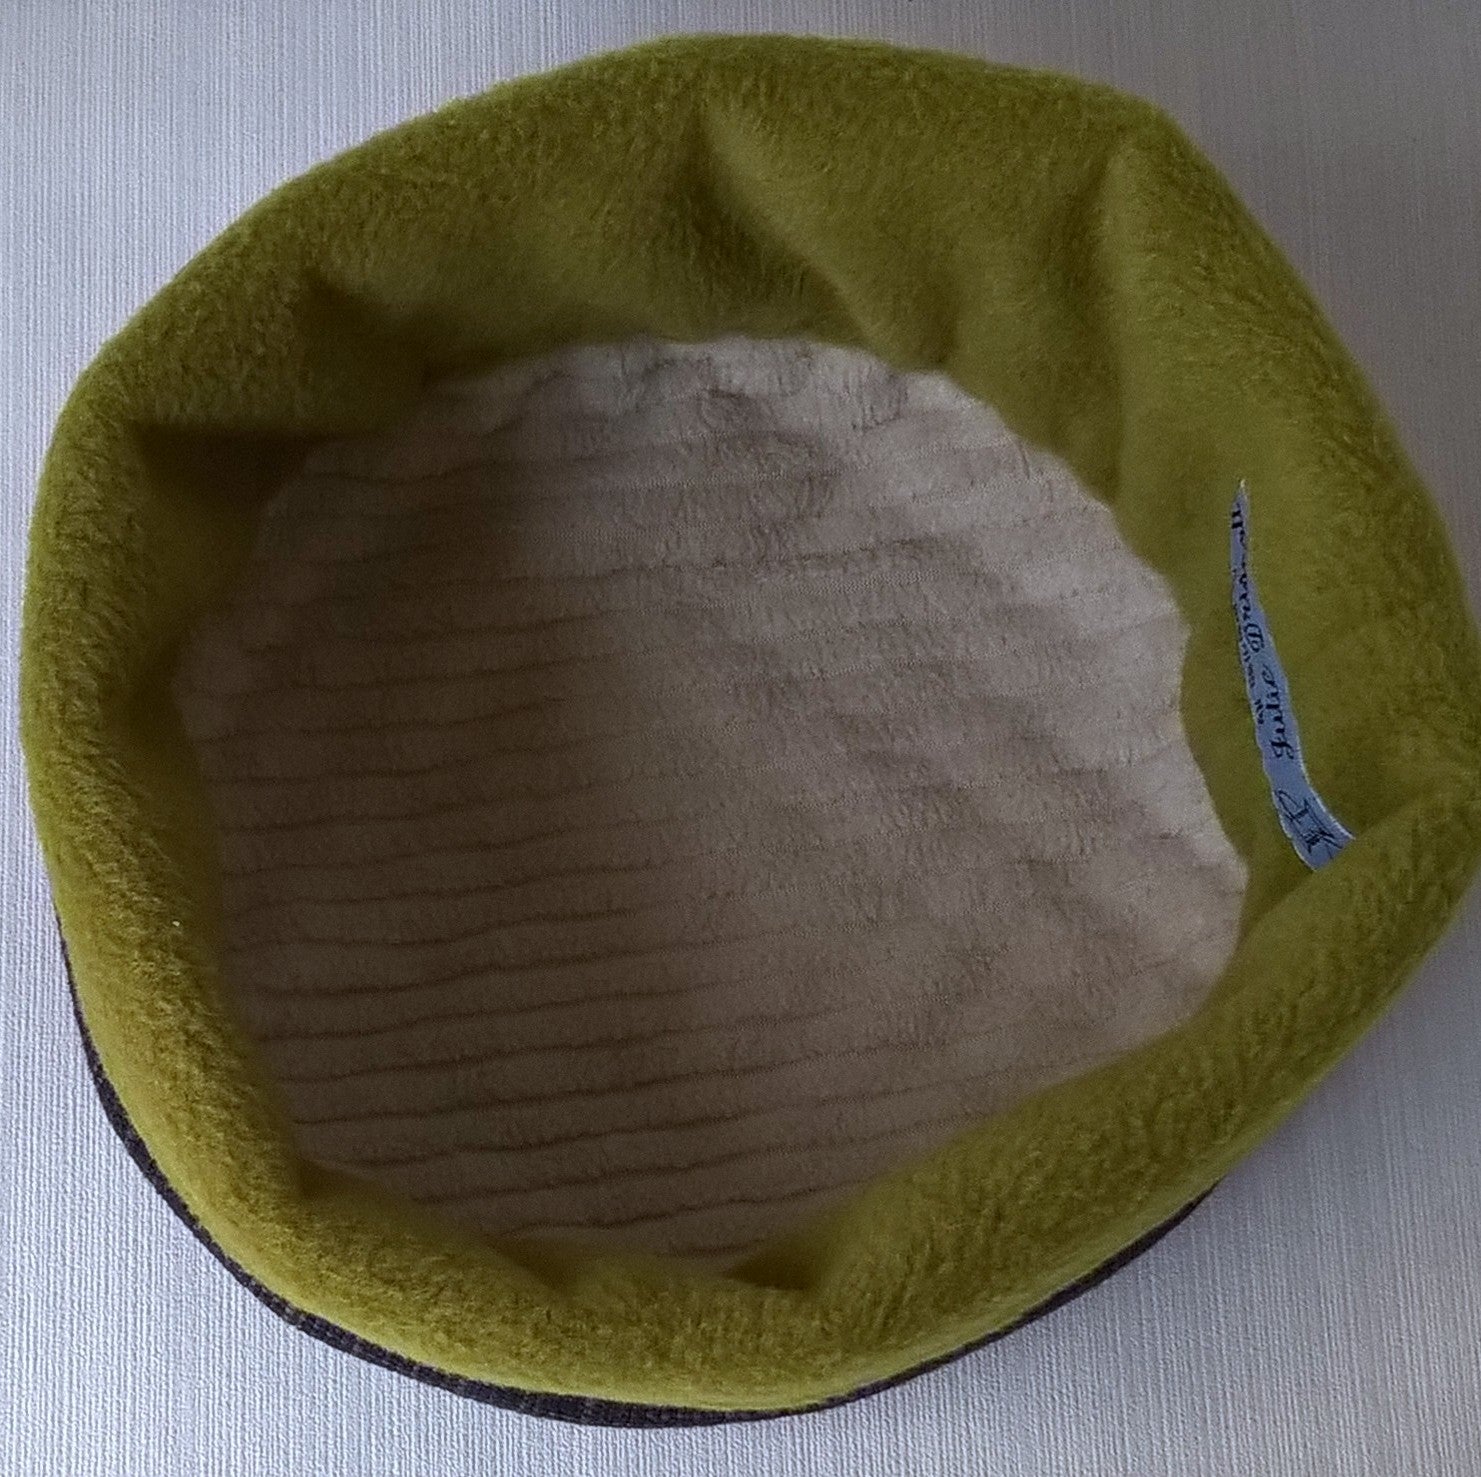 Brimless hat fully fleece lined